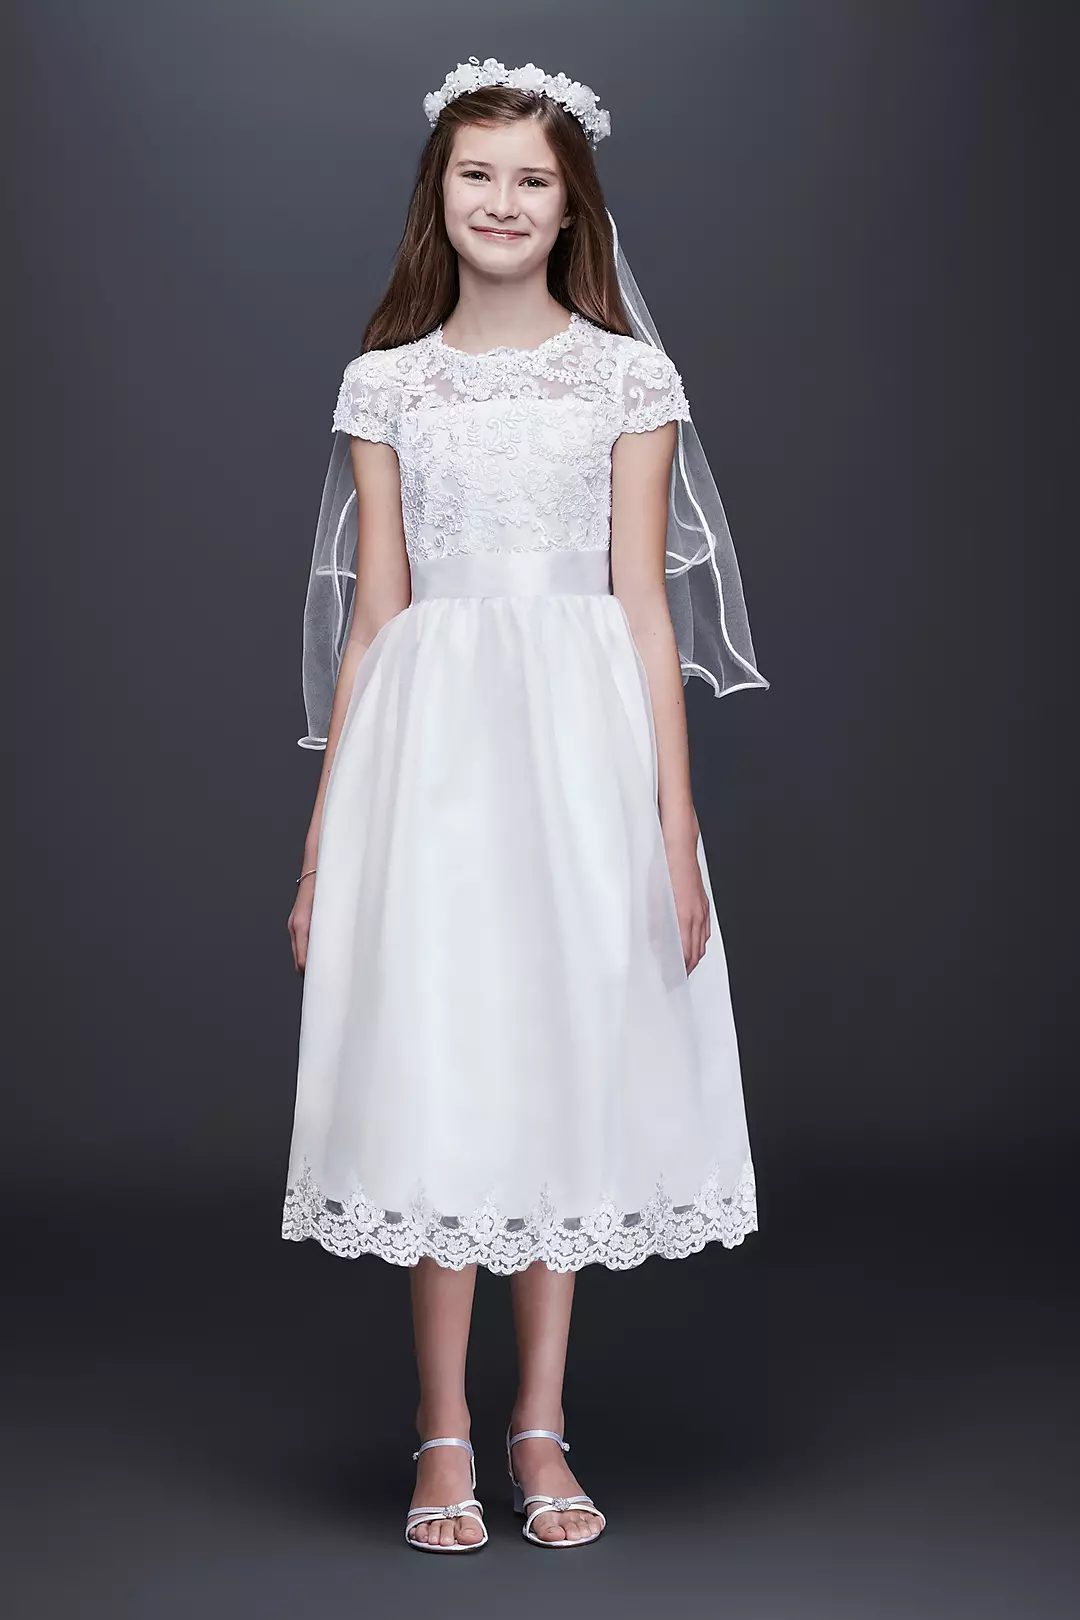 Illusion Flower Girl Dress with Appliqued Skirt Image